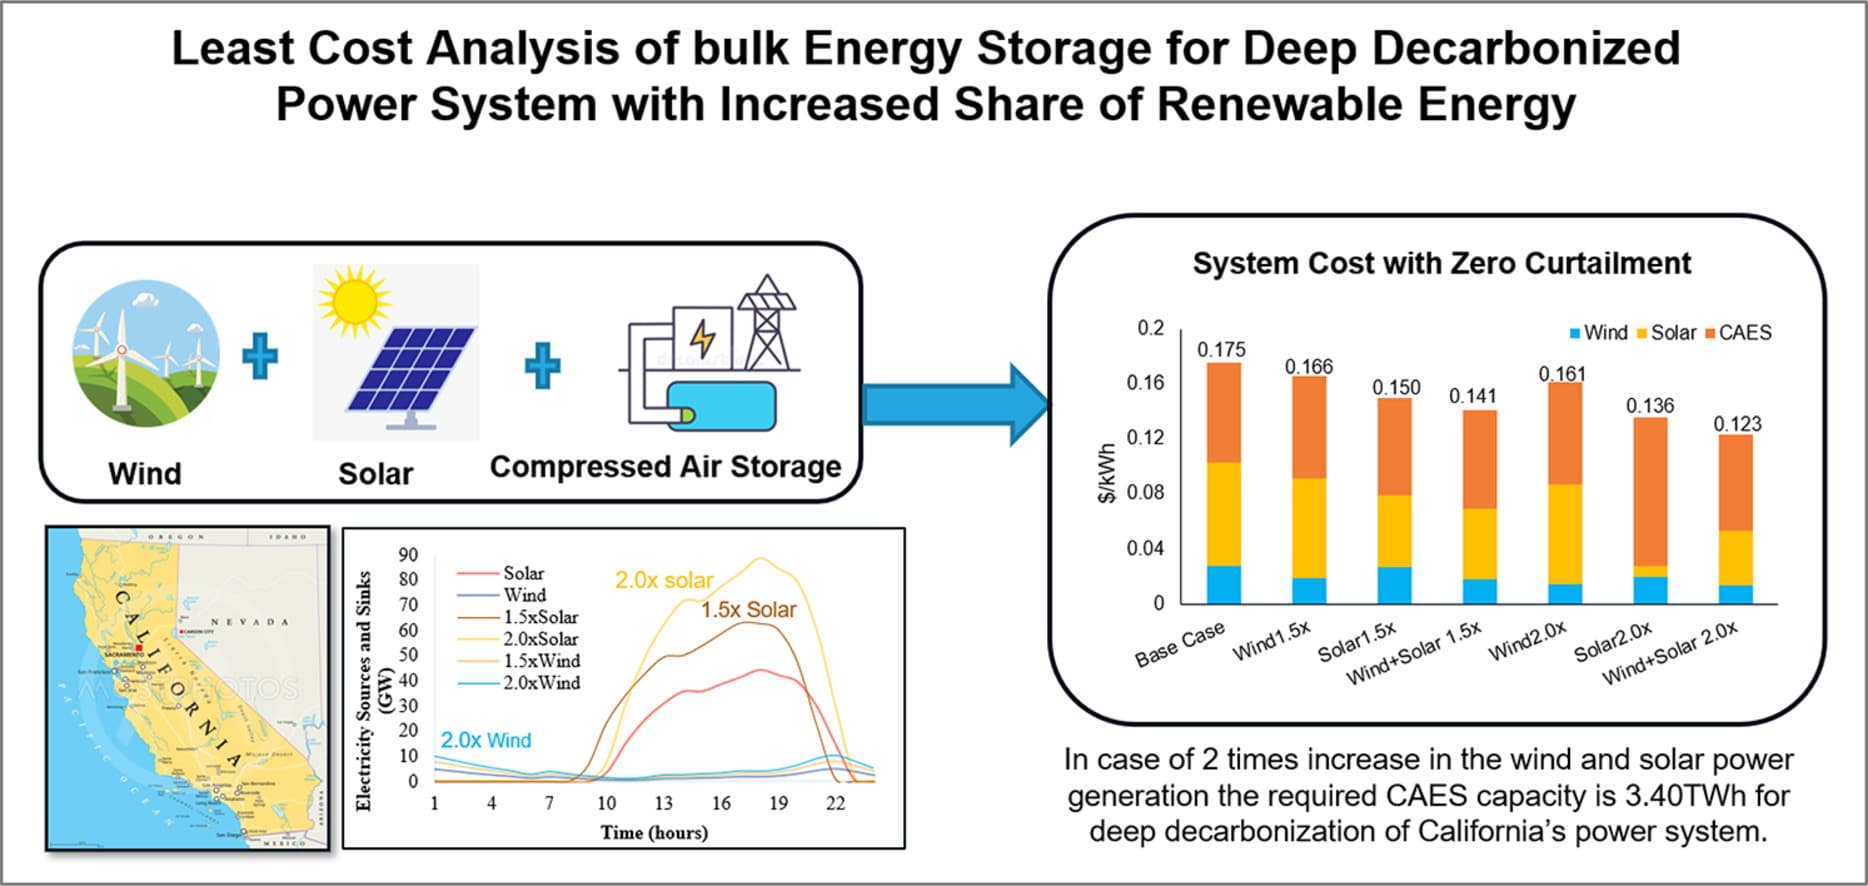 Least cost analysis for deeply decarbonized power systems